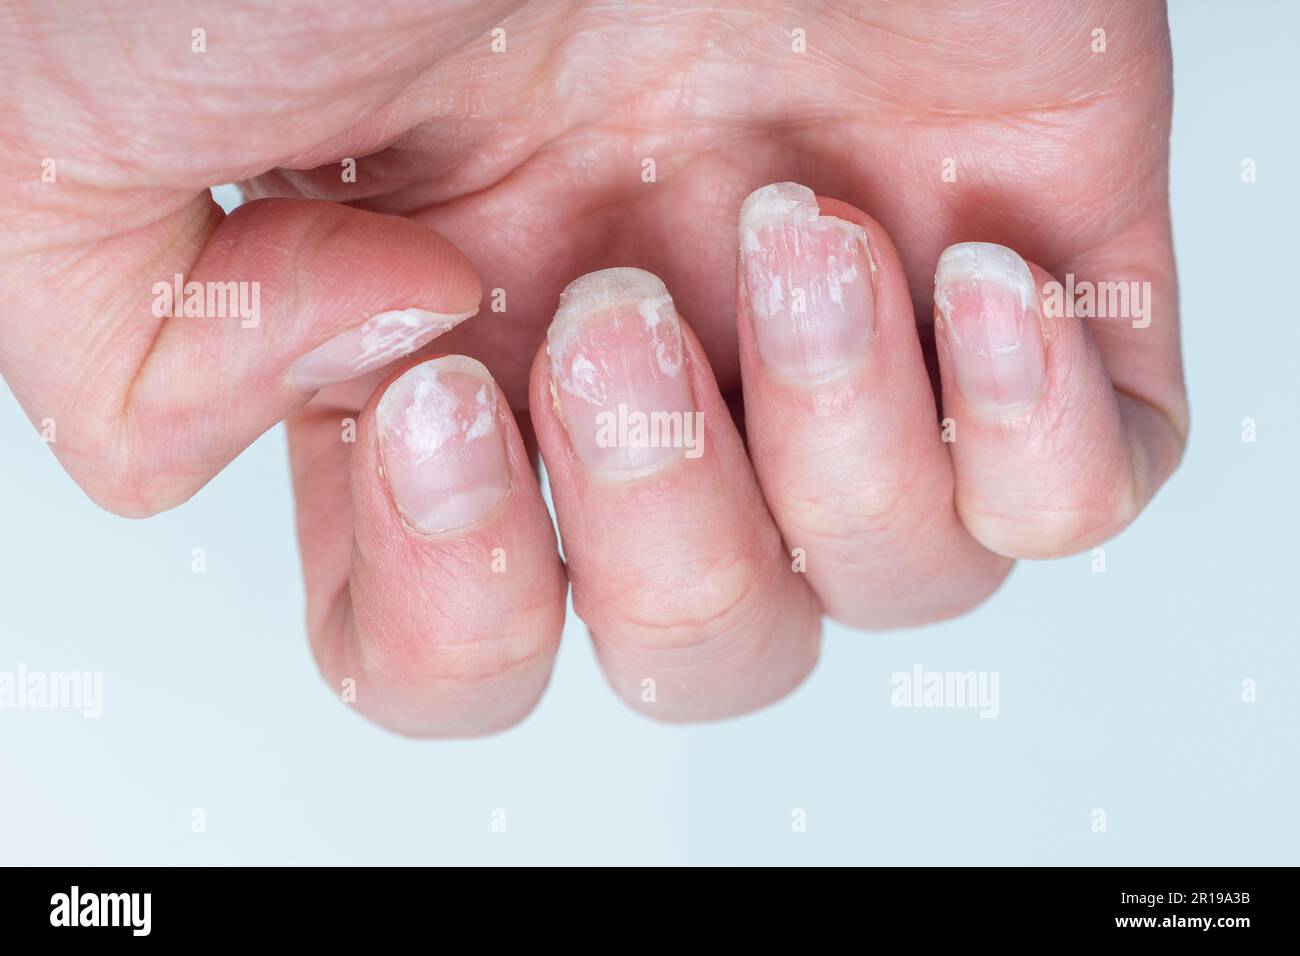 My Acrylic-Damaged Nails Looked Terrible Until I Tried These 15 Solutions